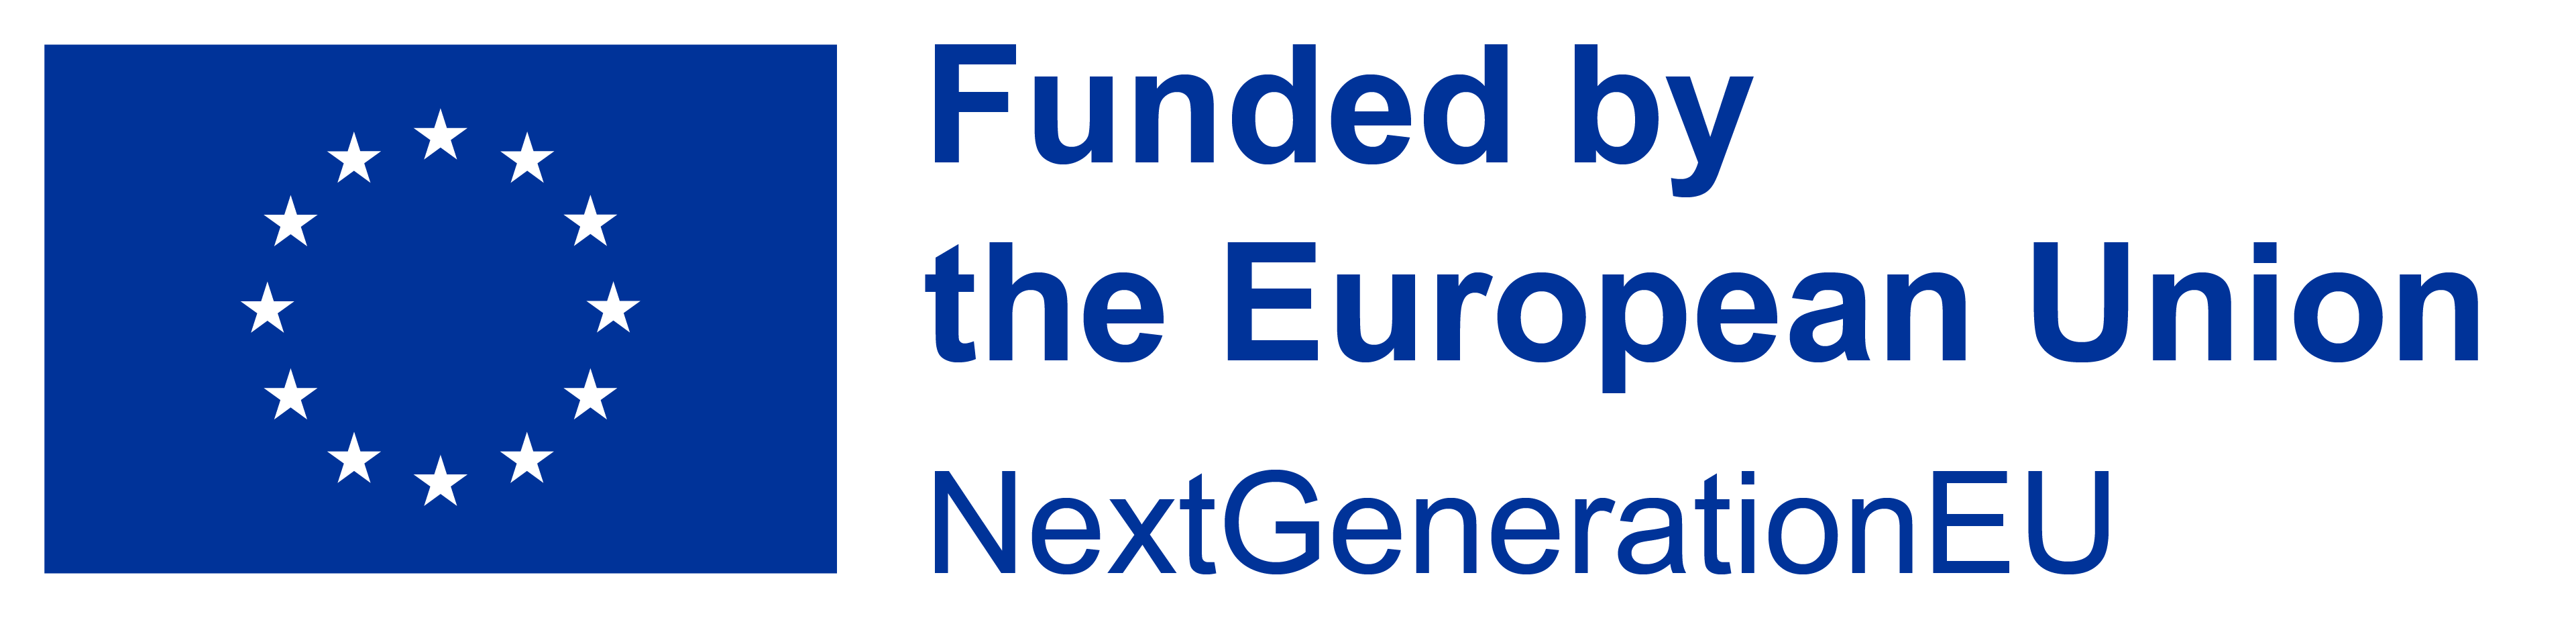 1. Funded by the European Union RGB MONOCHROME